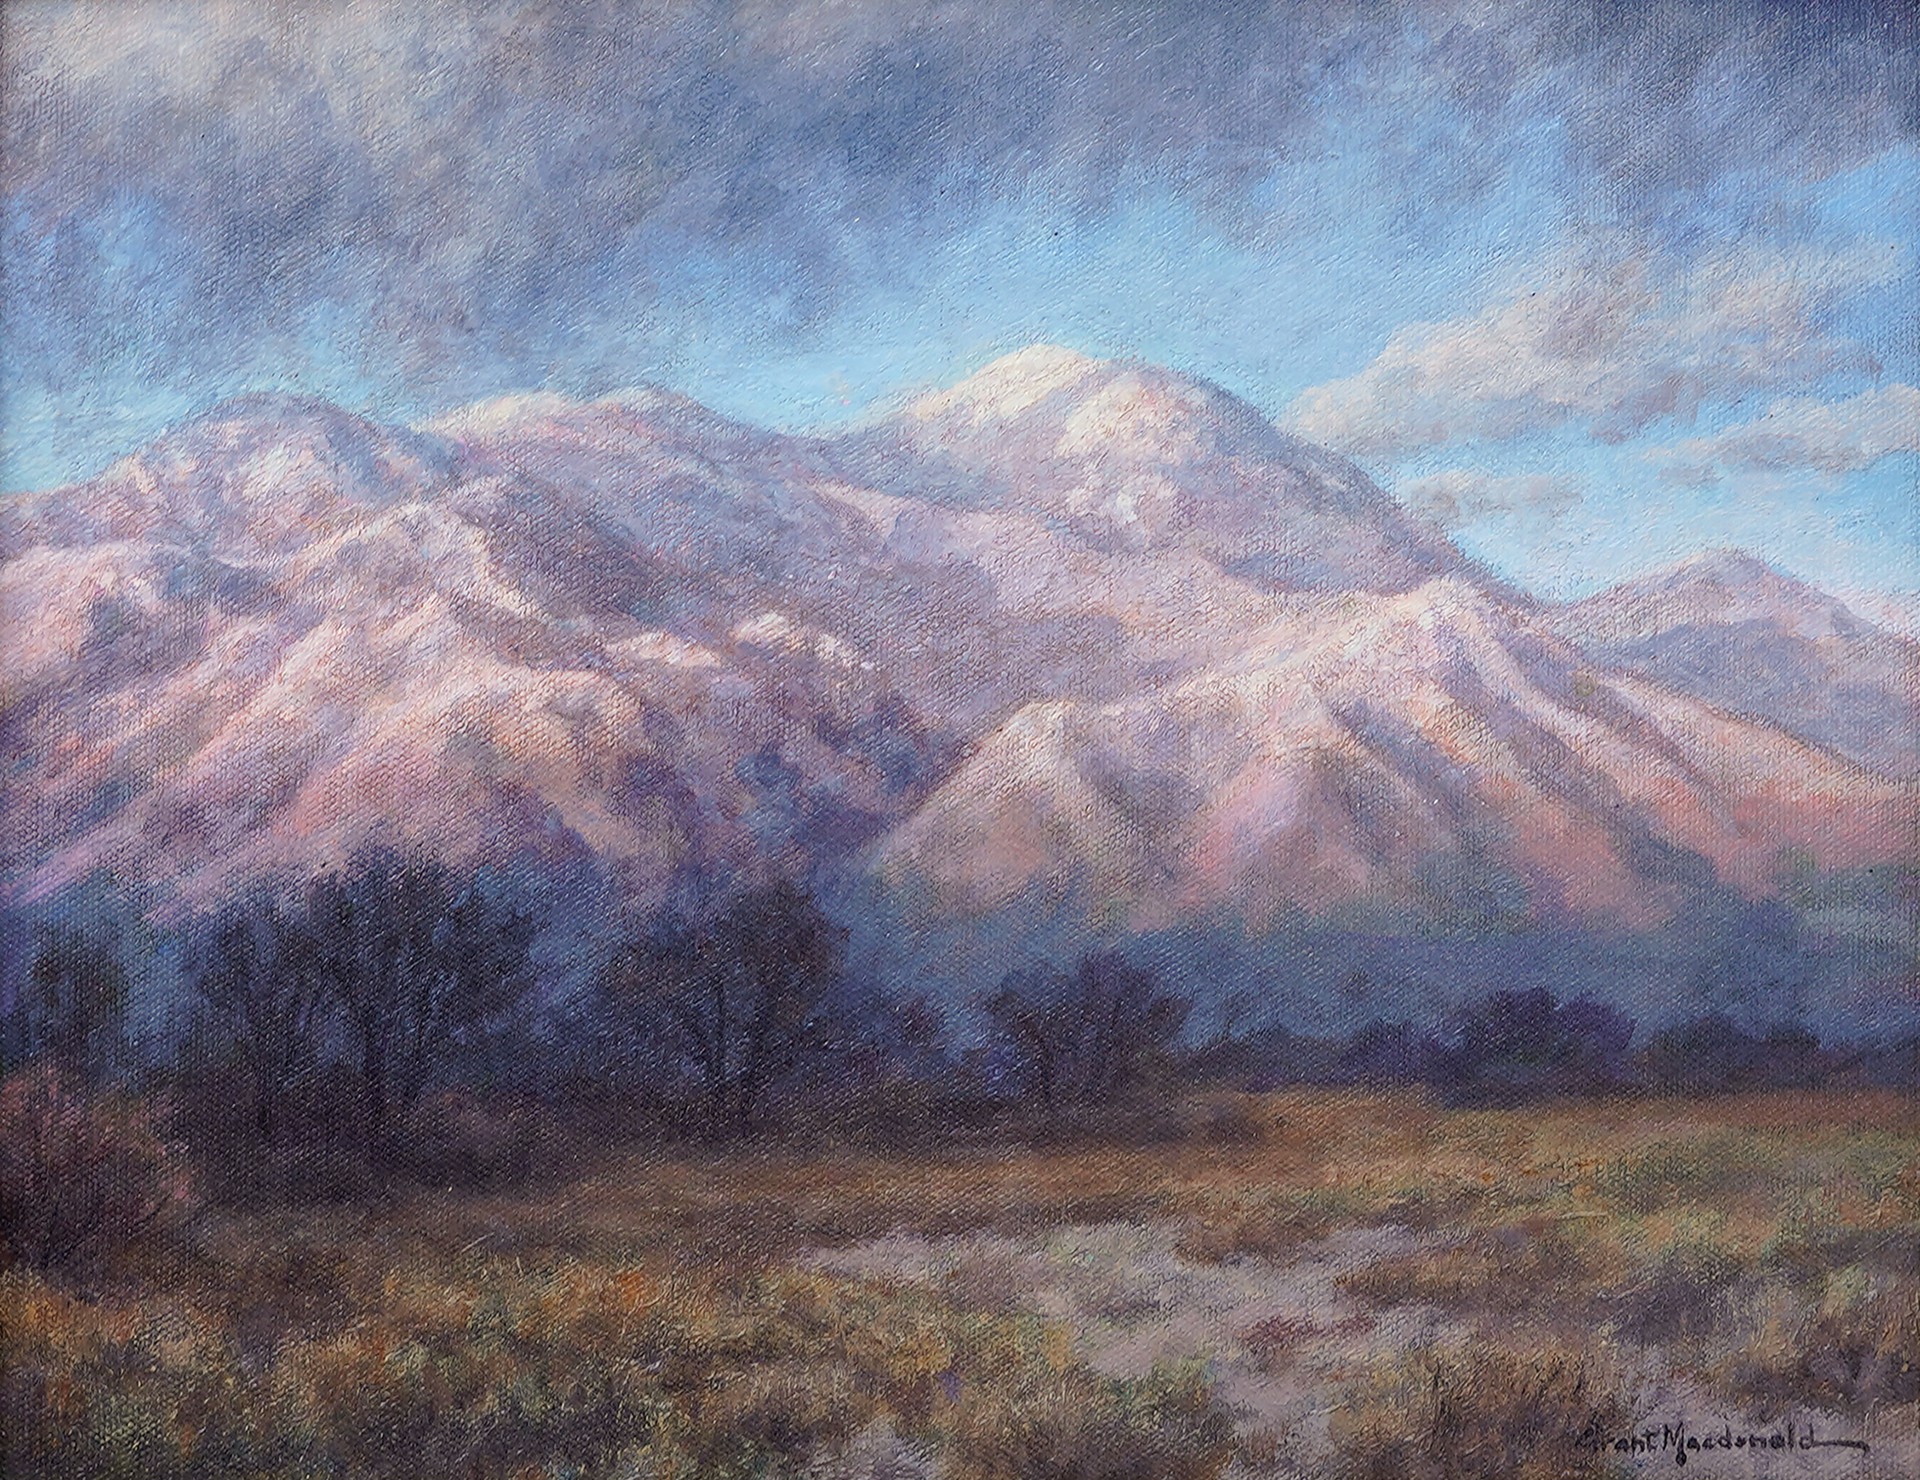 Taos Mountain with Lifting Storm Study by Grant Macdonald